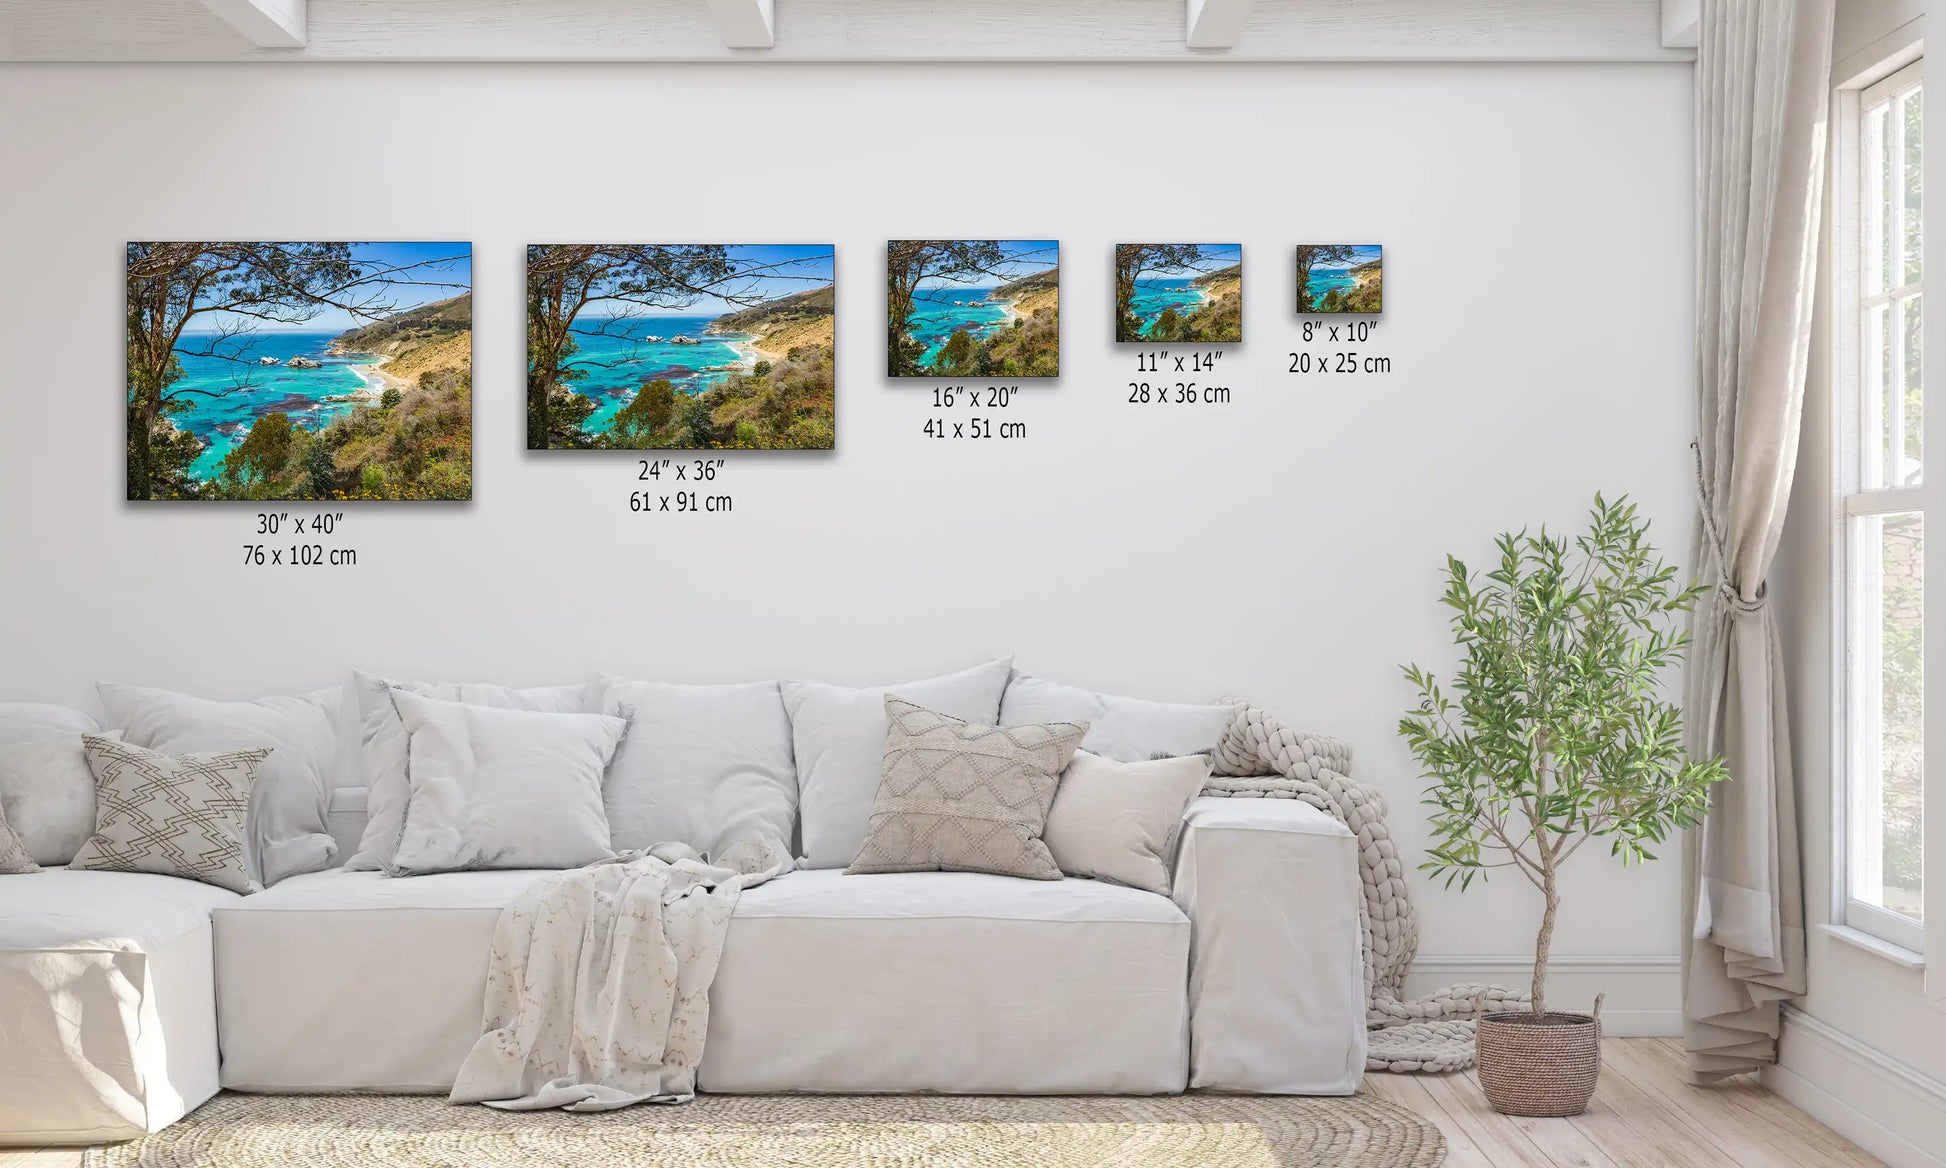 Big Sur California ocean seascape wall art available in multiple sizes shown over living room sofa